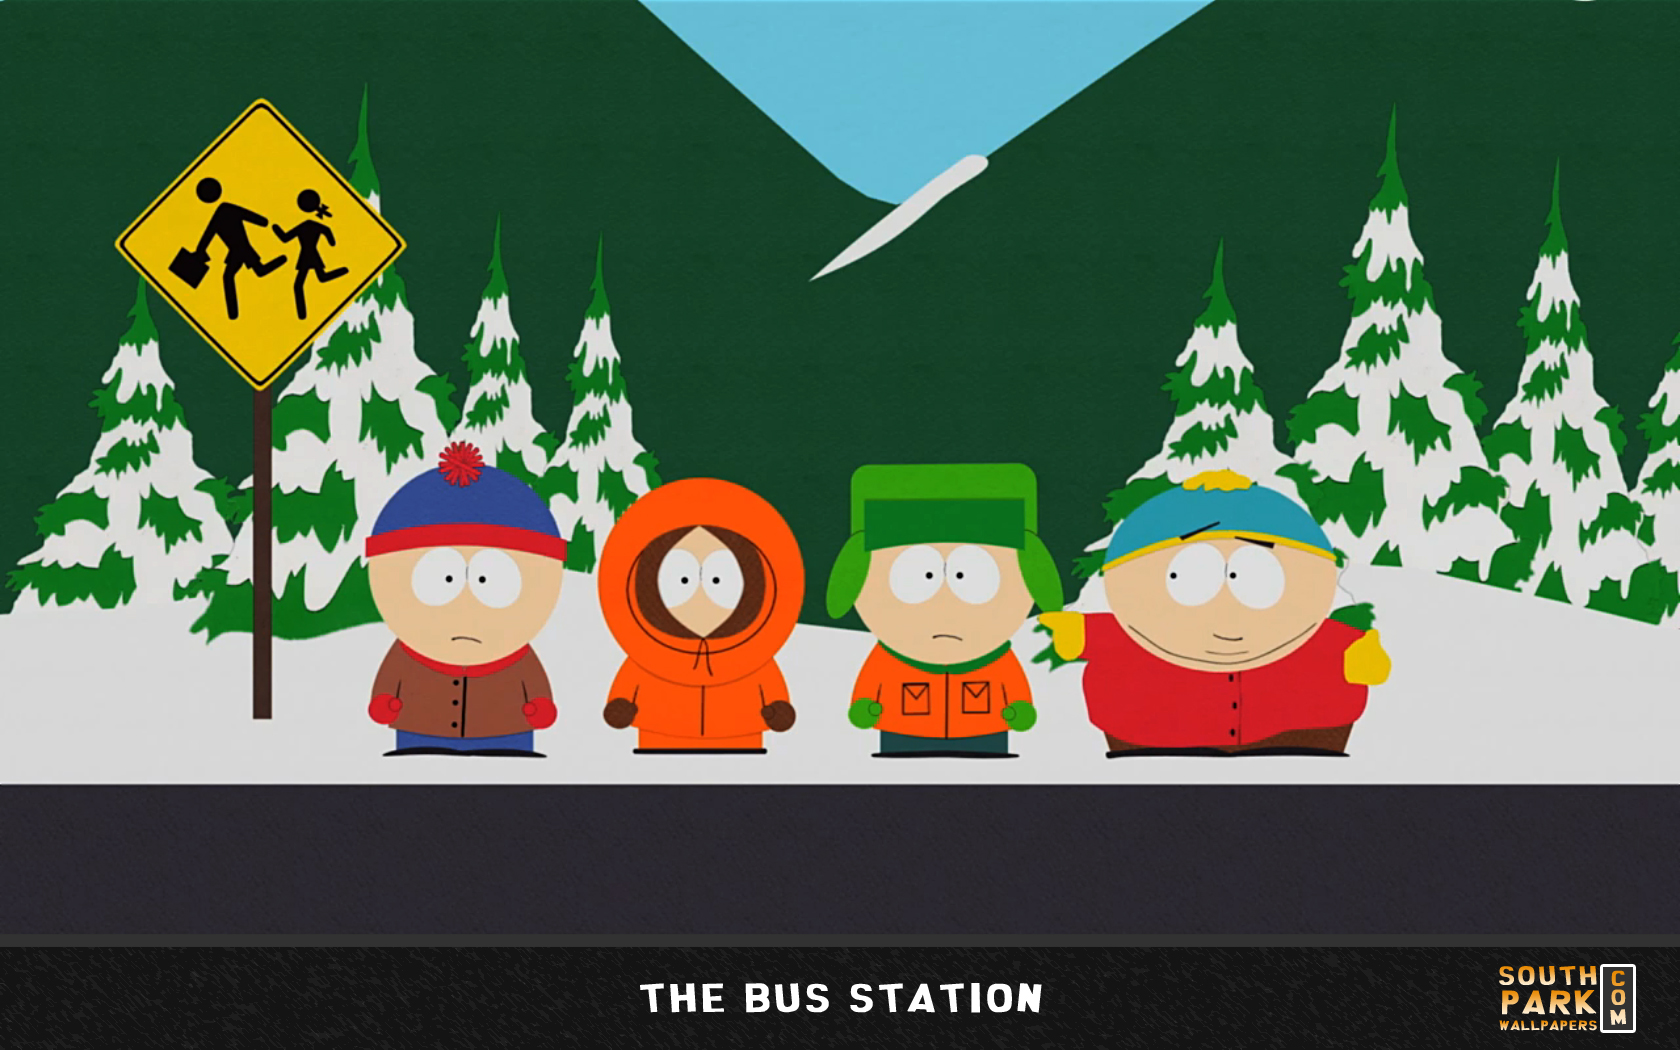 South Park Wallpapers 77 images inside